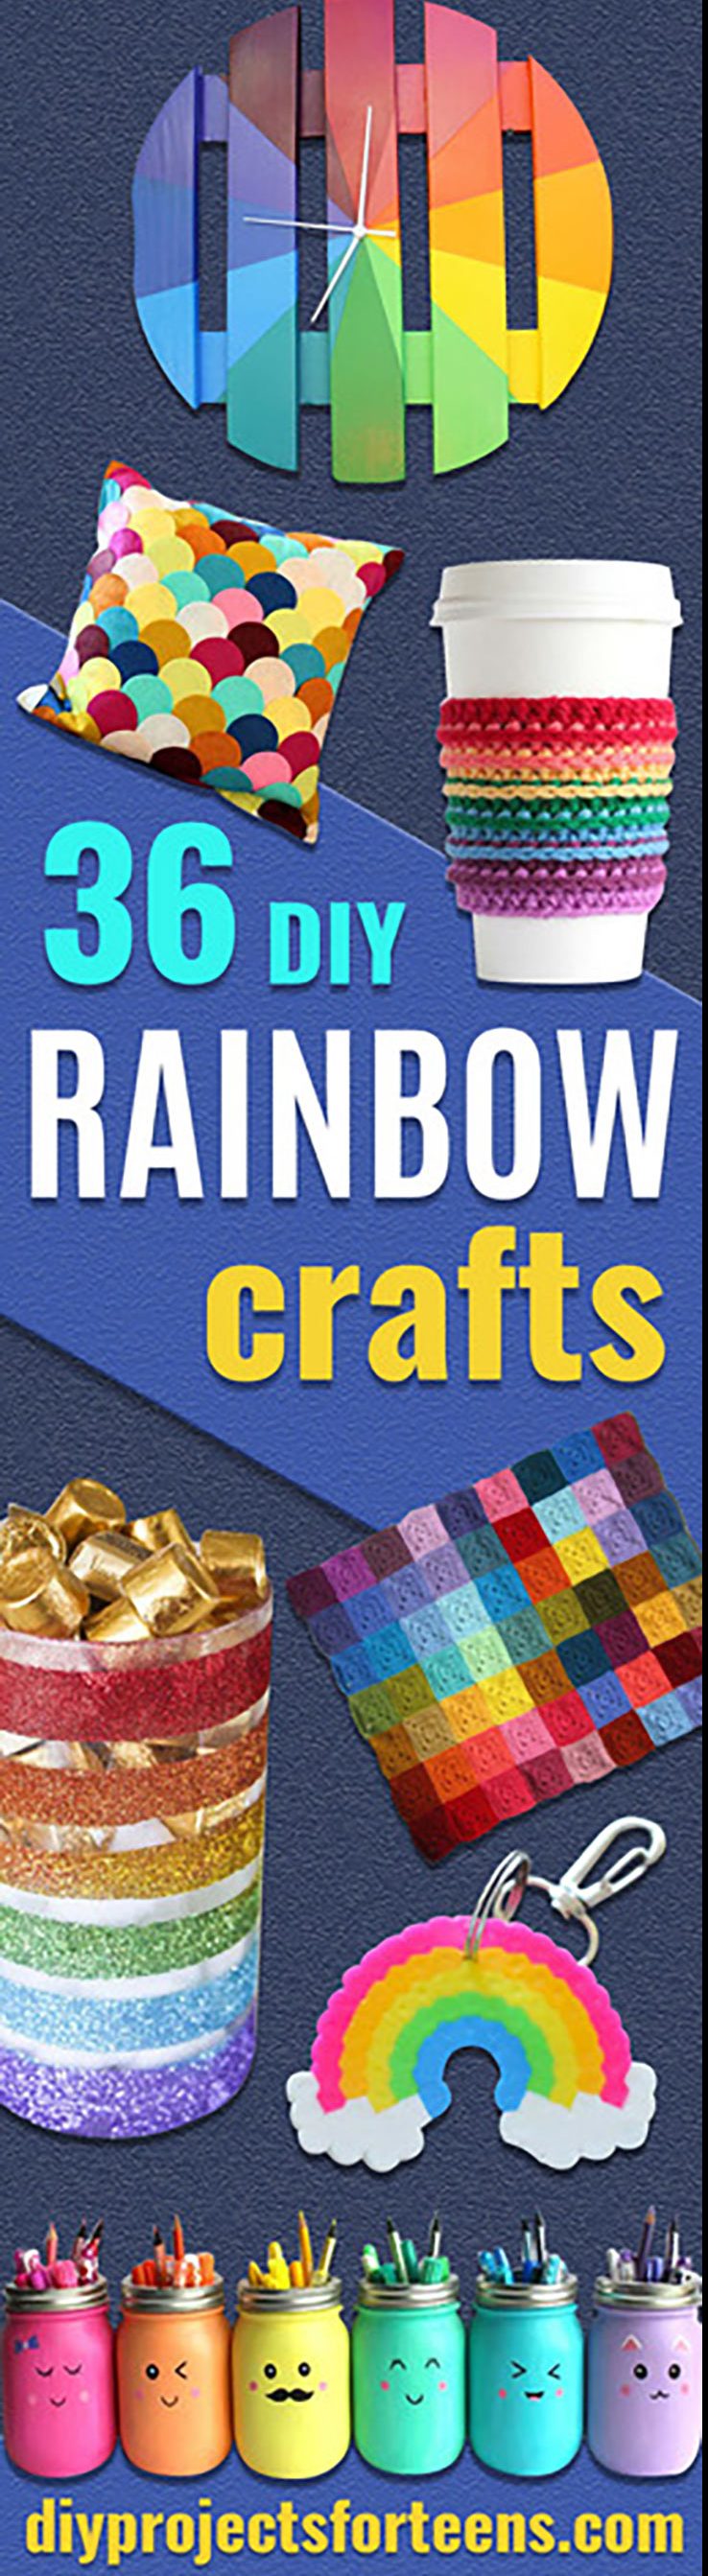 36 DIY Rainbow Crafts That Will Make You Smile All Day Long